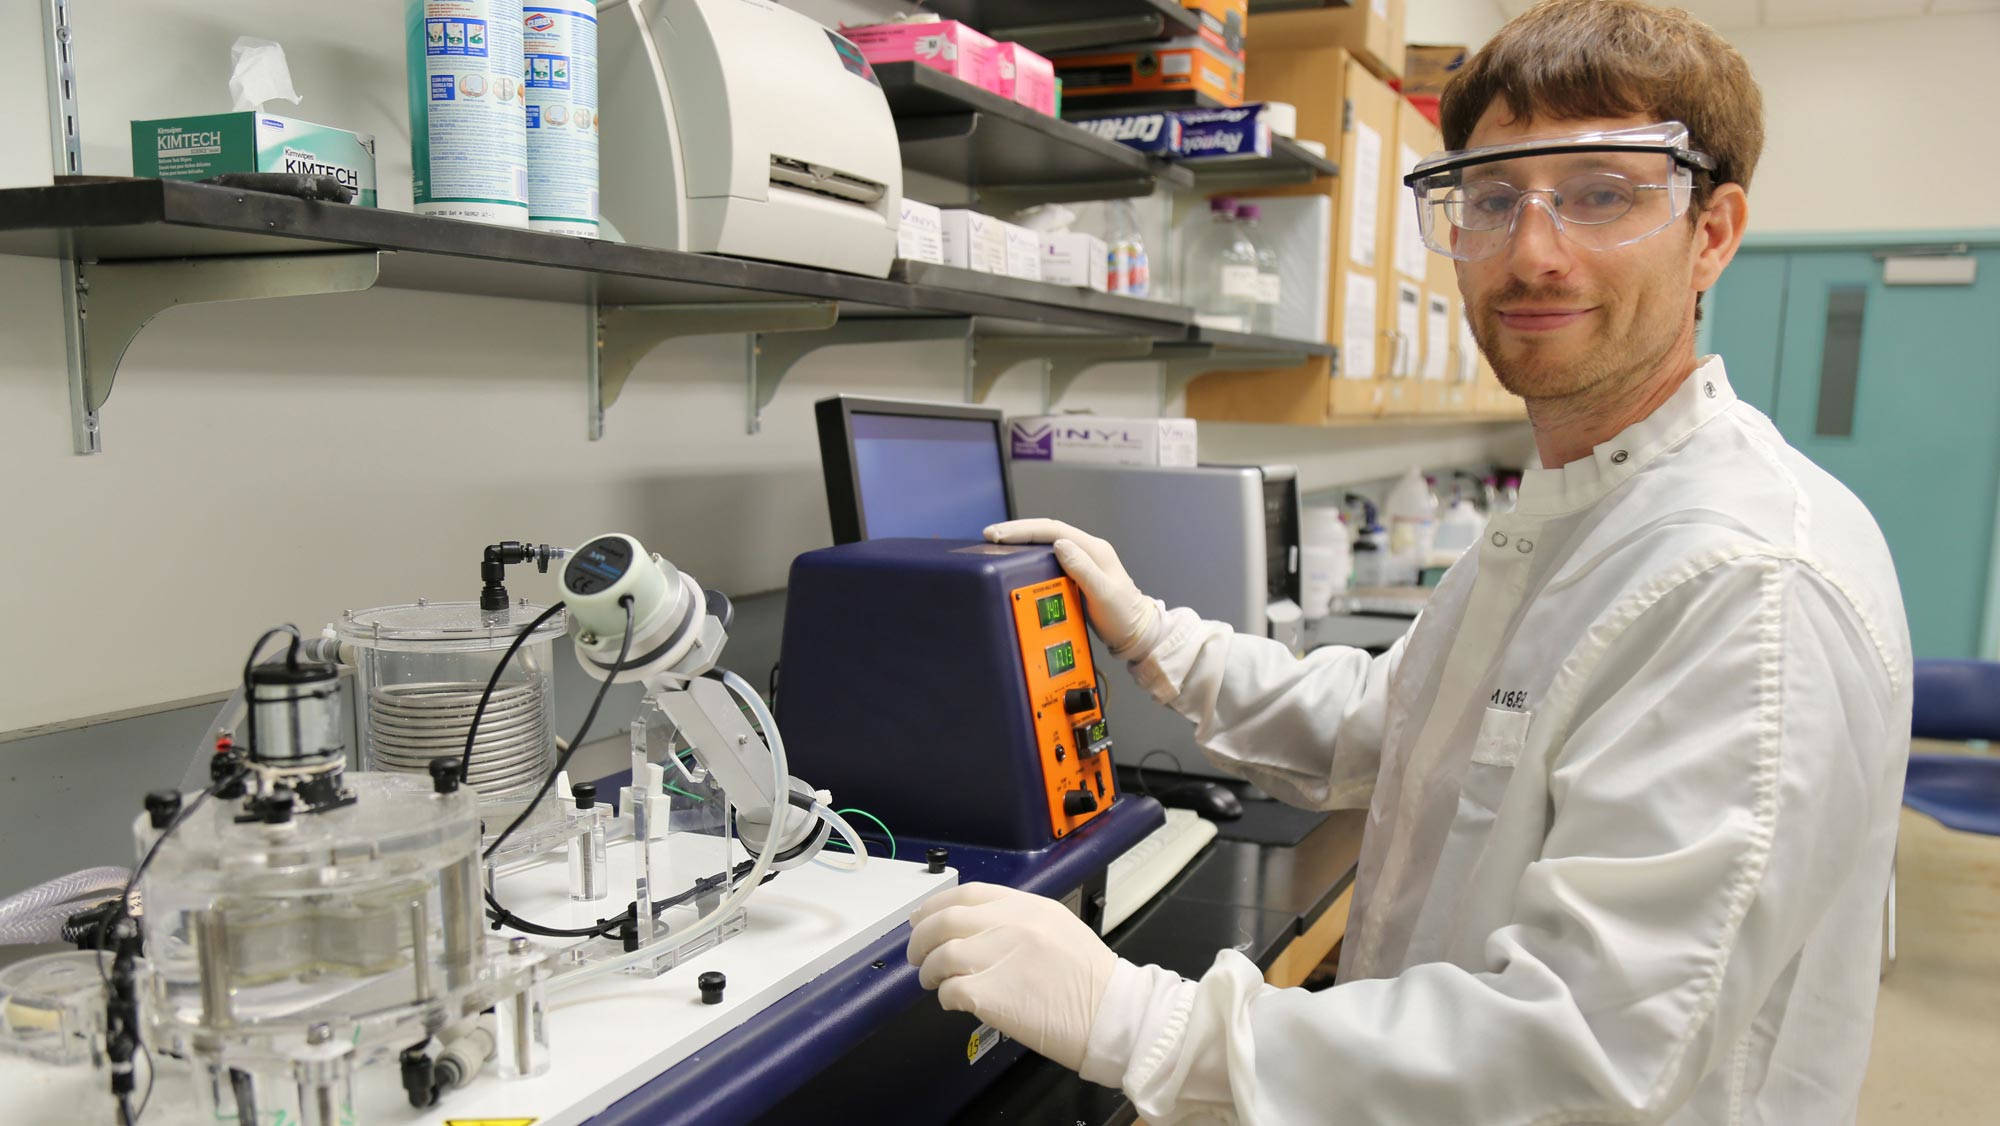 A smiling researcher with brown hair, wearing goggles over glasses, a white lab coat, and white latex gloves works with equipment in a chemical engineering laboratory setting.